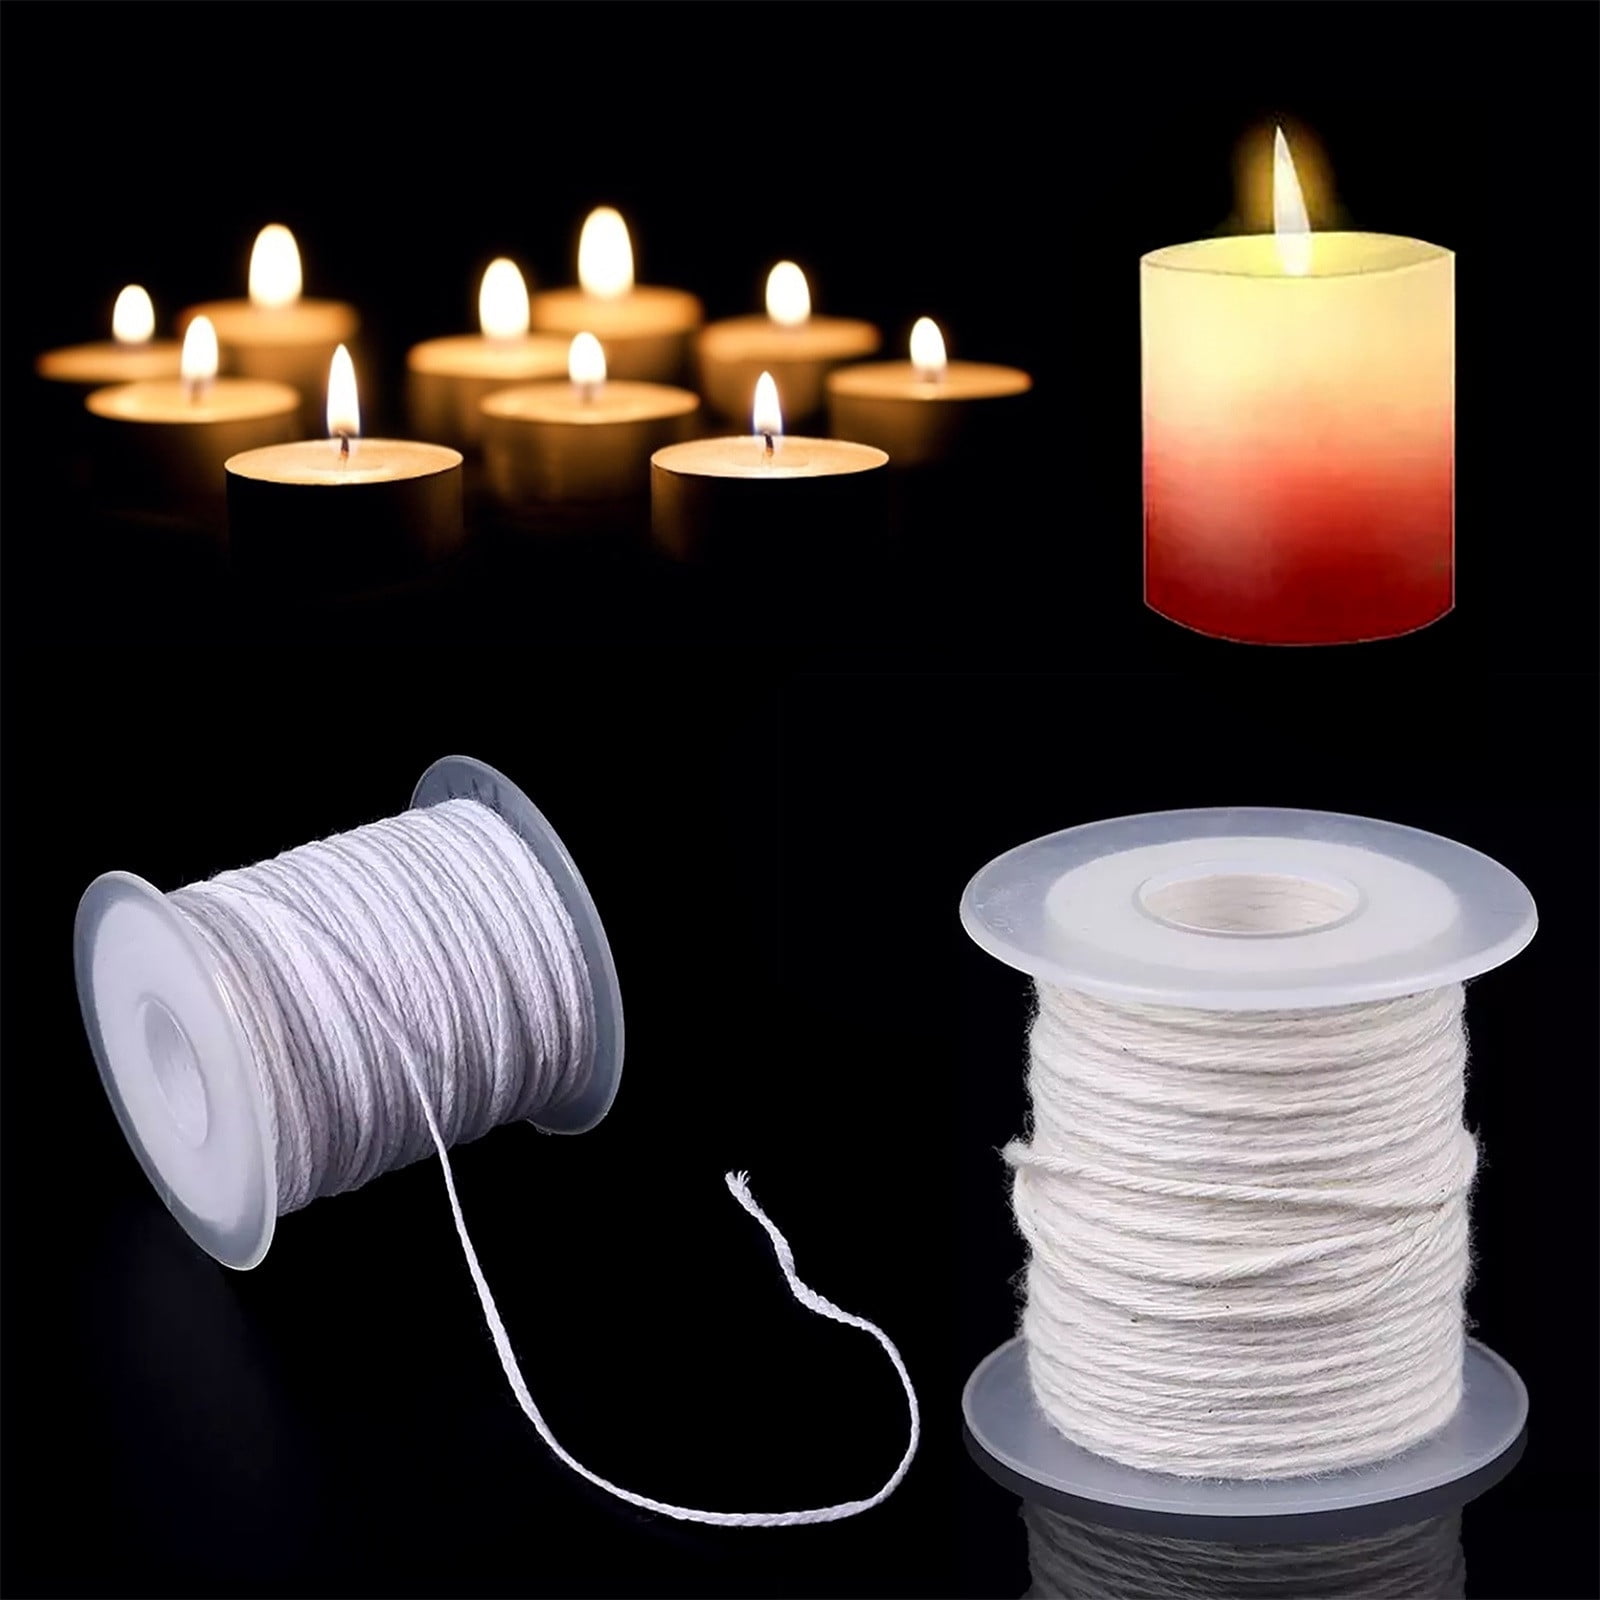 Cotton Wicks For Candles 2 Rolls Braided Candle Wick Core Spool 61m / 200ft  DIY Candle Wick Replacement Gifts For Christmas